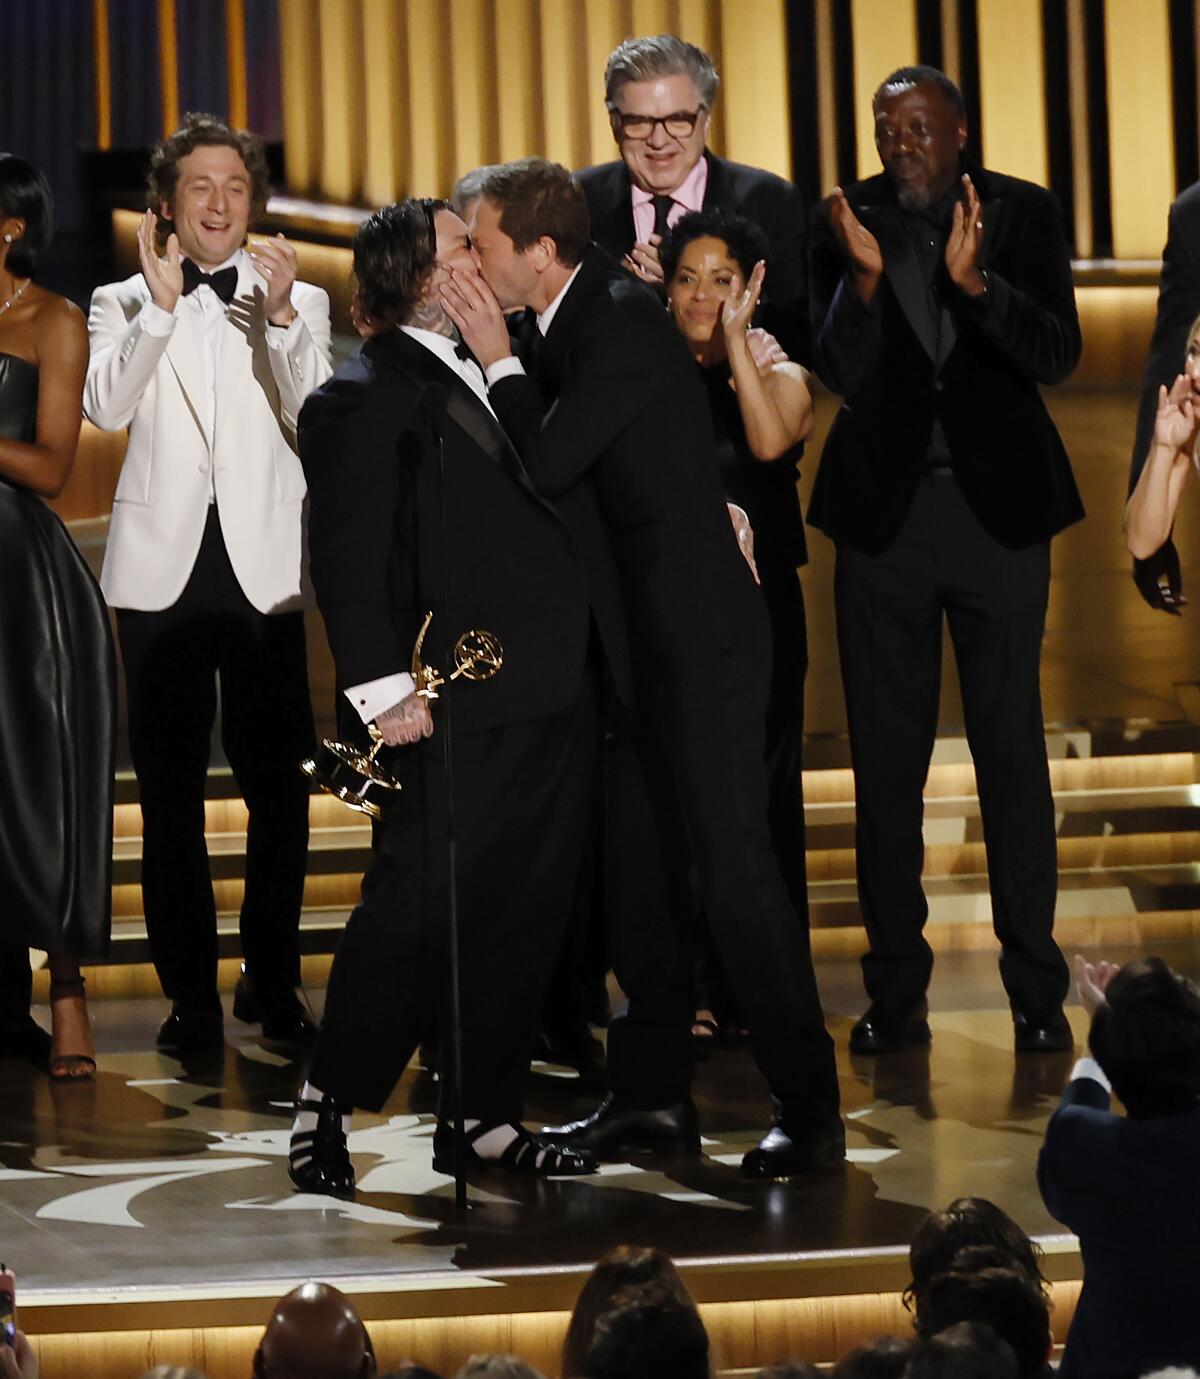 Matty Matheson and Ebon Moss-Bachrach kiss on stage while accepting "The Bear's" Emmy Award.